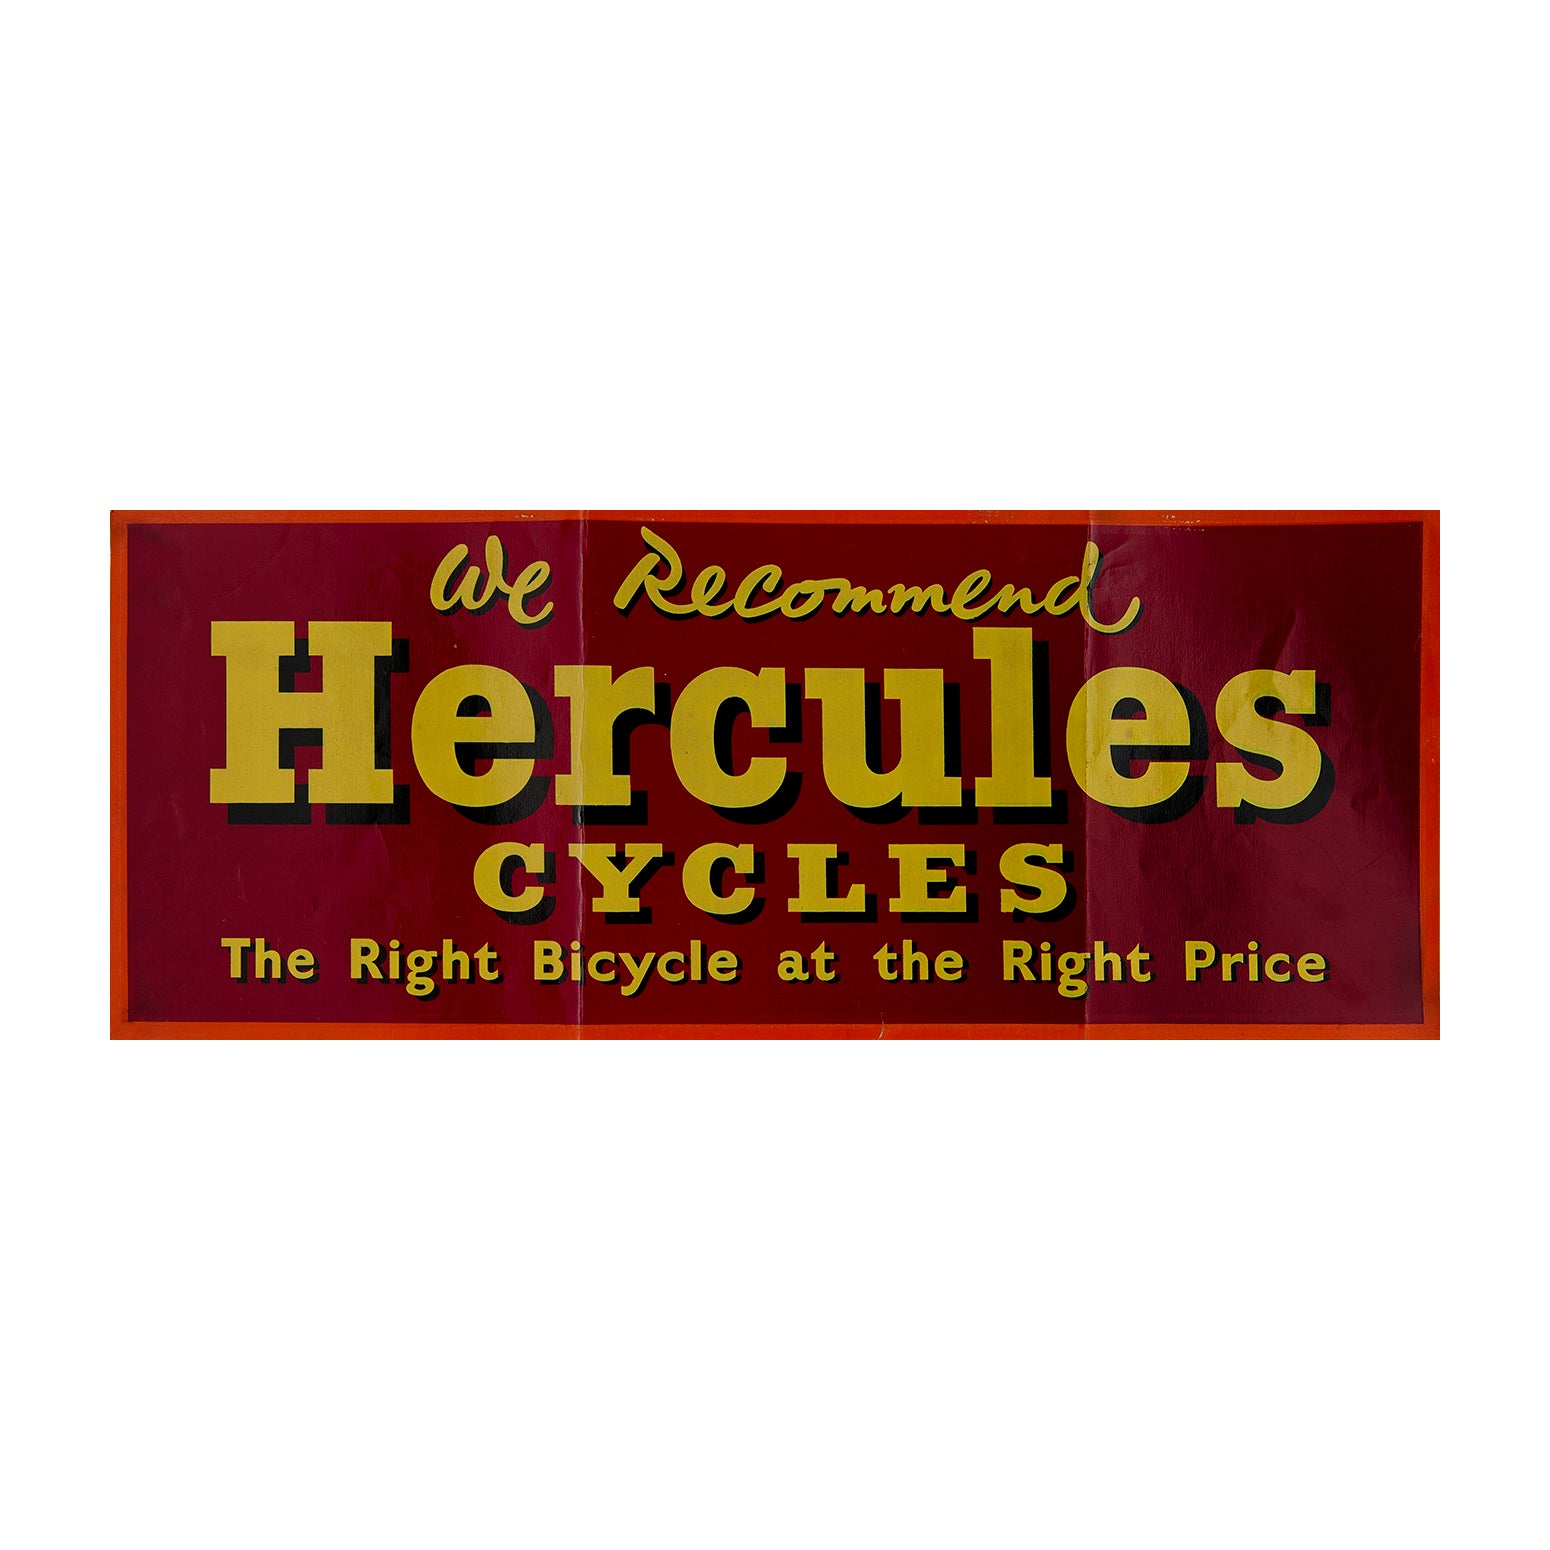 We recommend Hercules cycles. The Right Bicycle at the Right Price